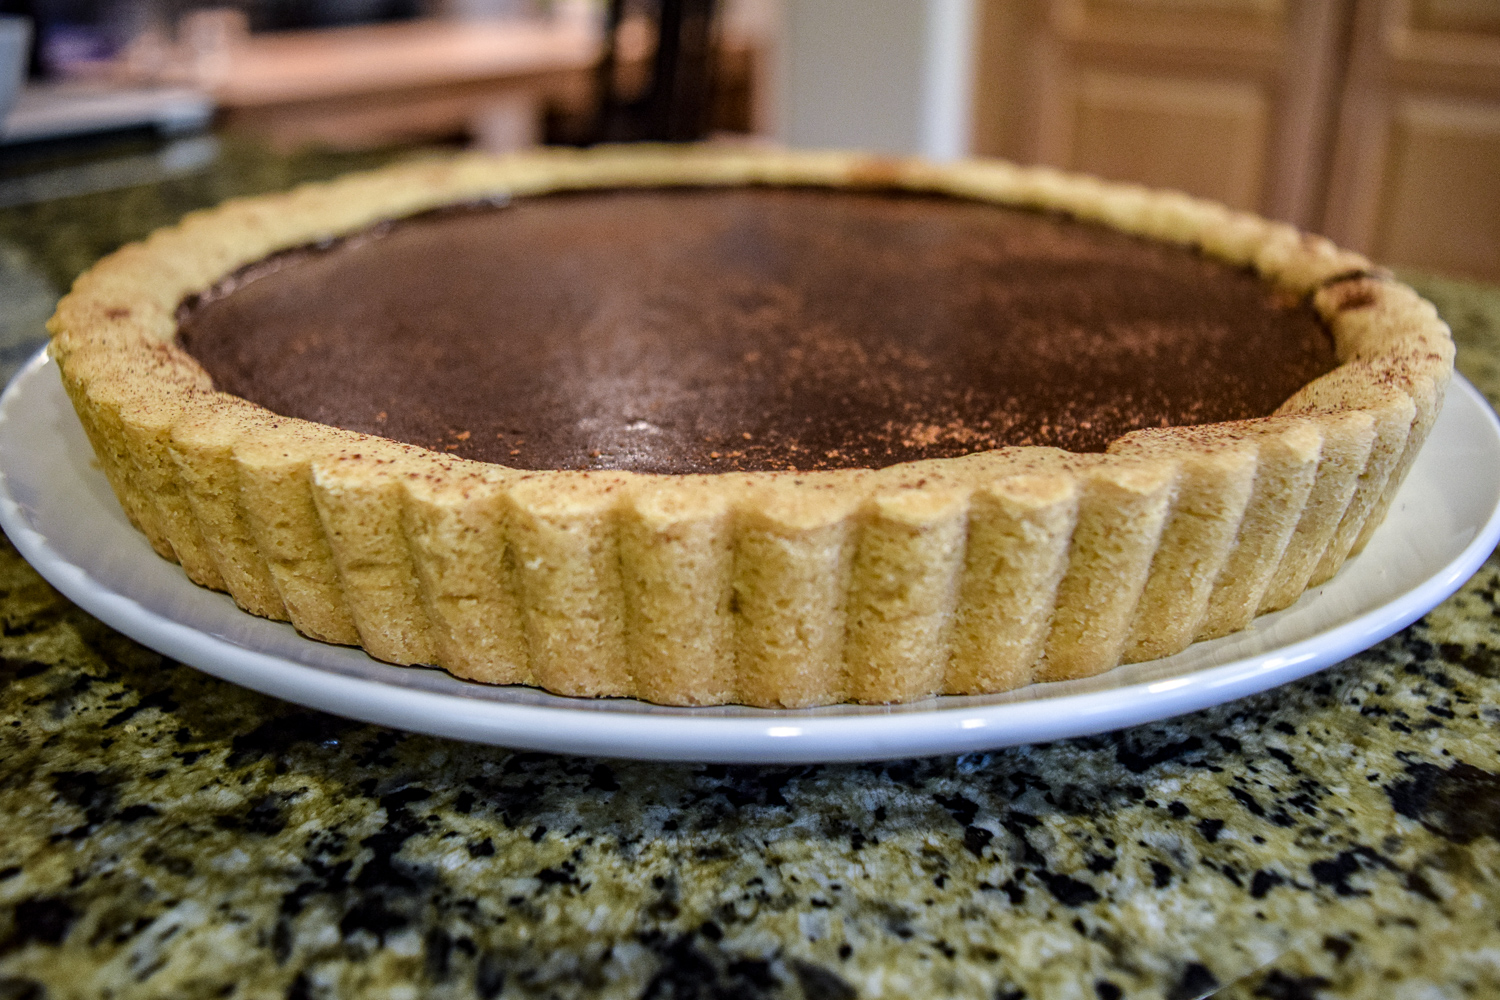 Finished Spicy Mexican Hot-Chocolate Ganache Tart from side